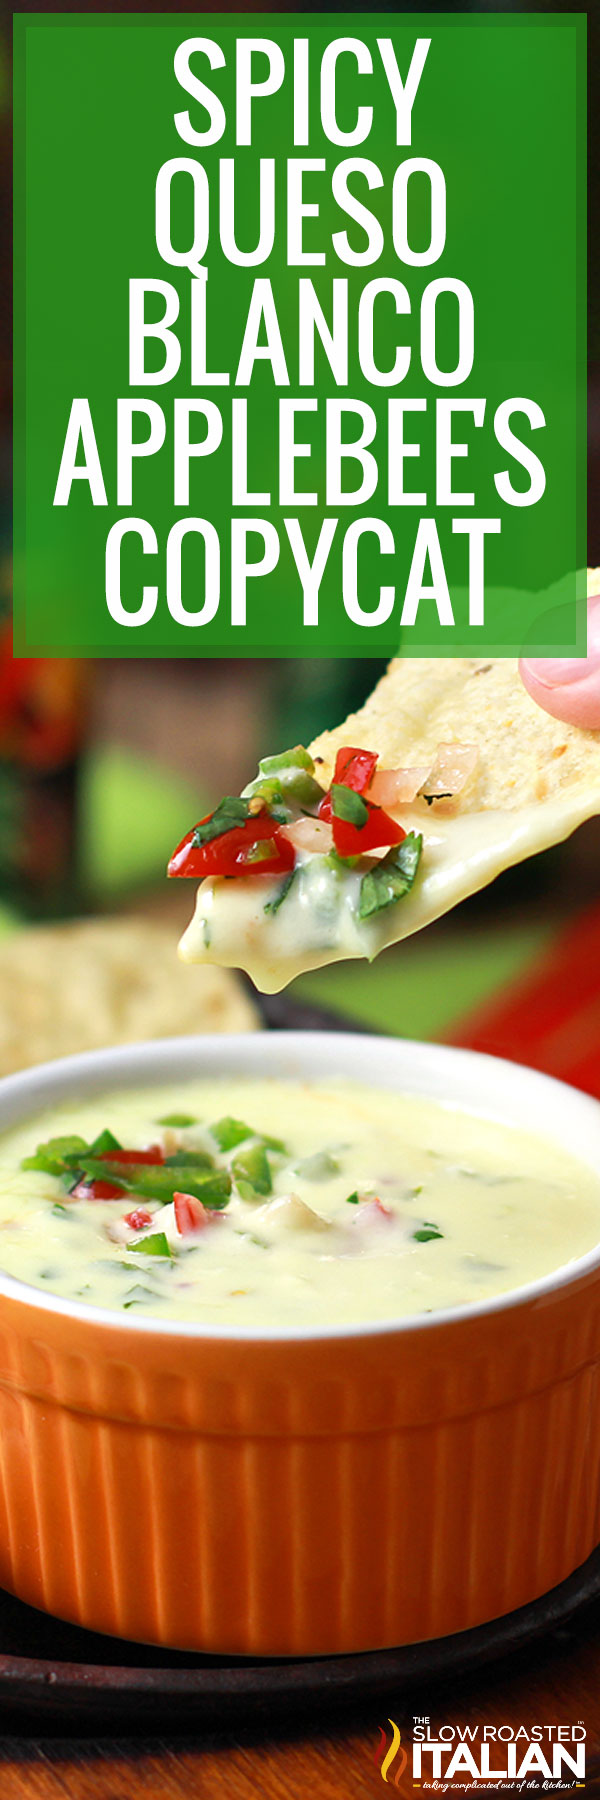 titled image (and shown): spicy queso blanco Applebee's copycat